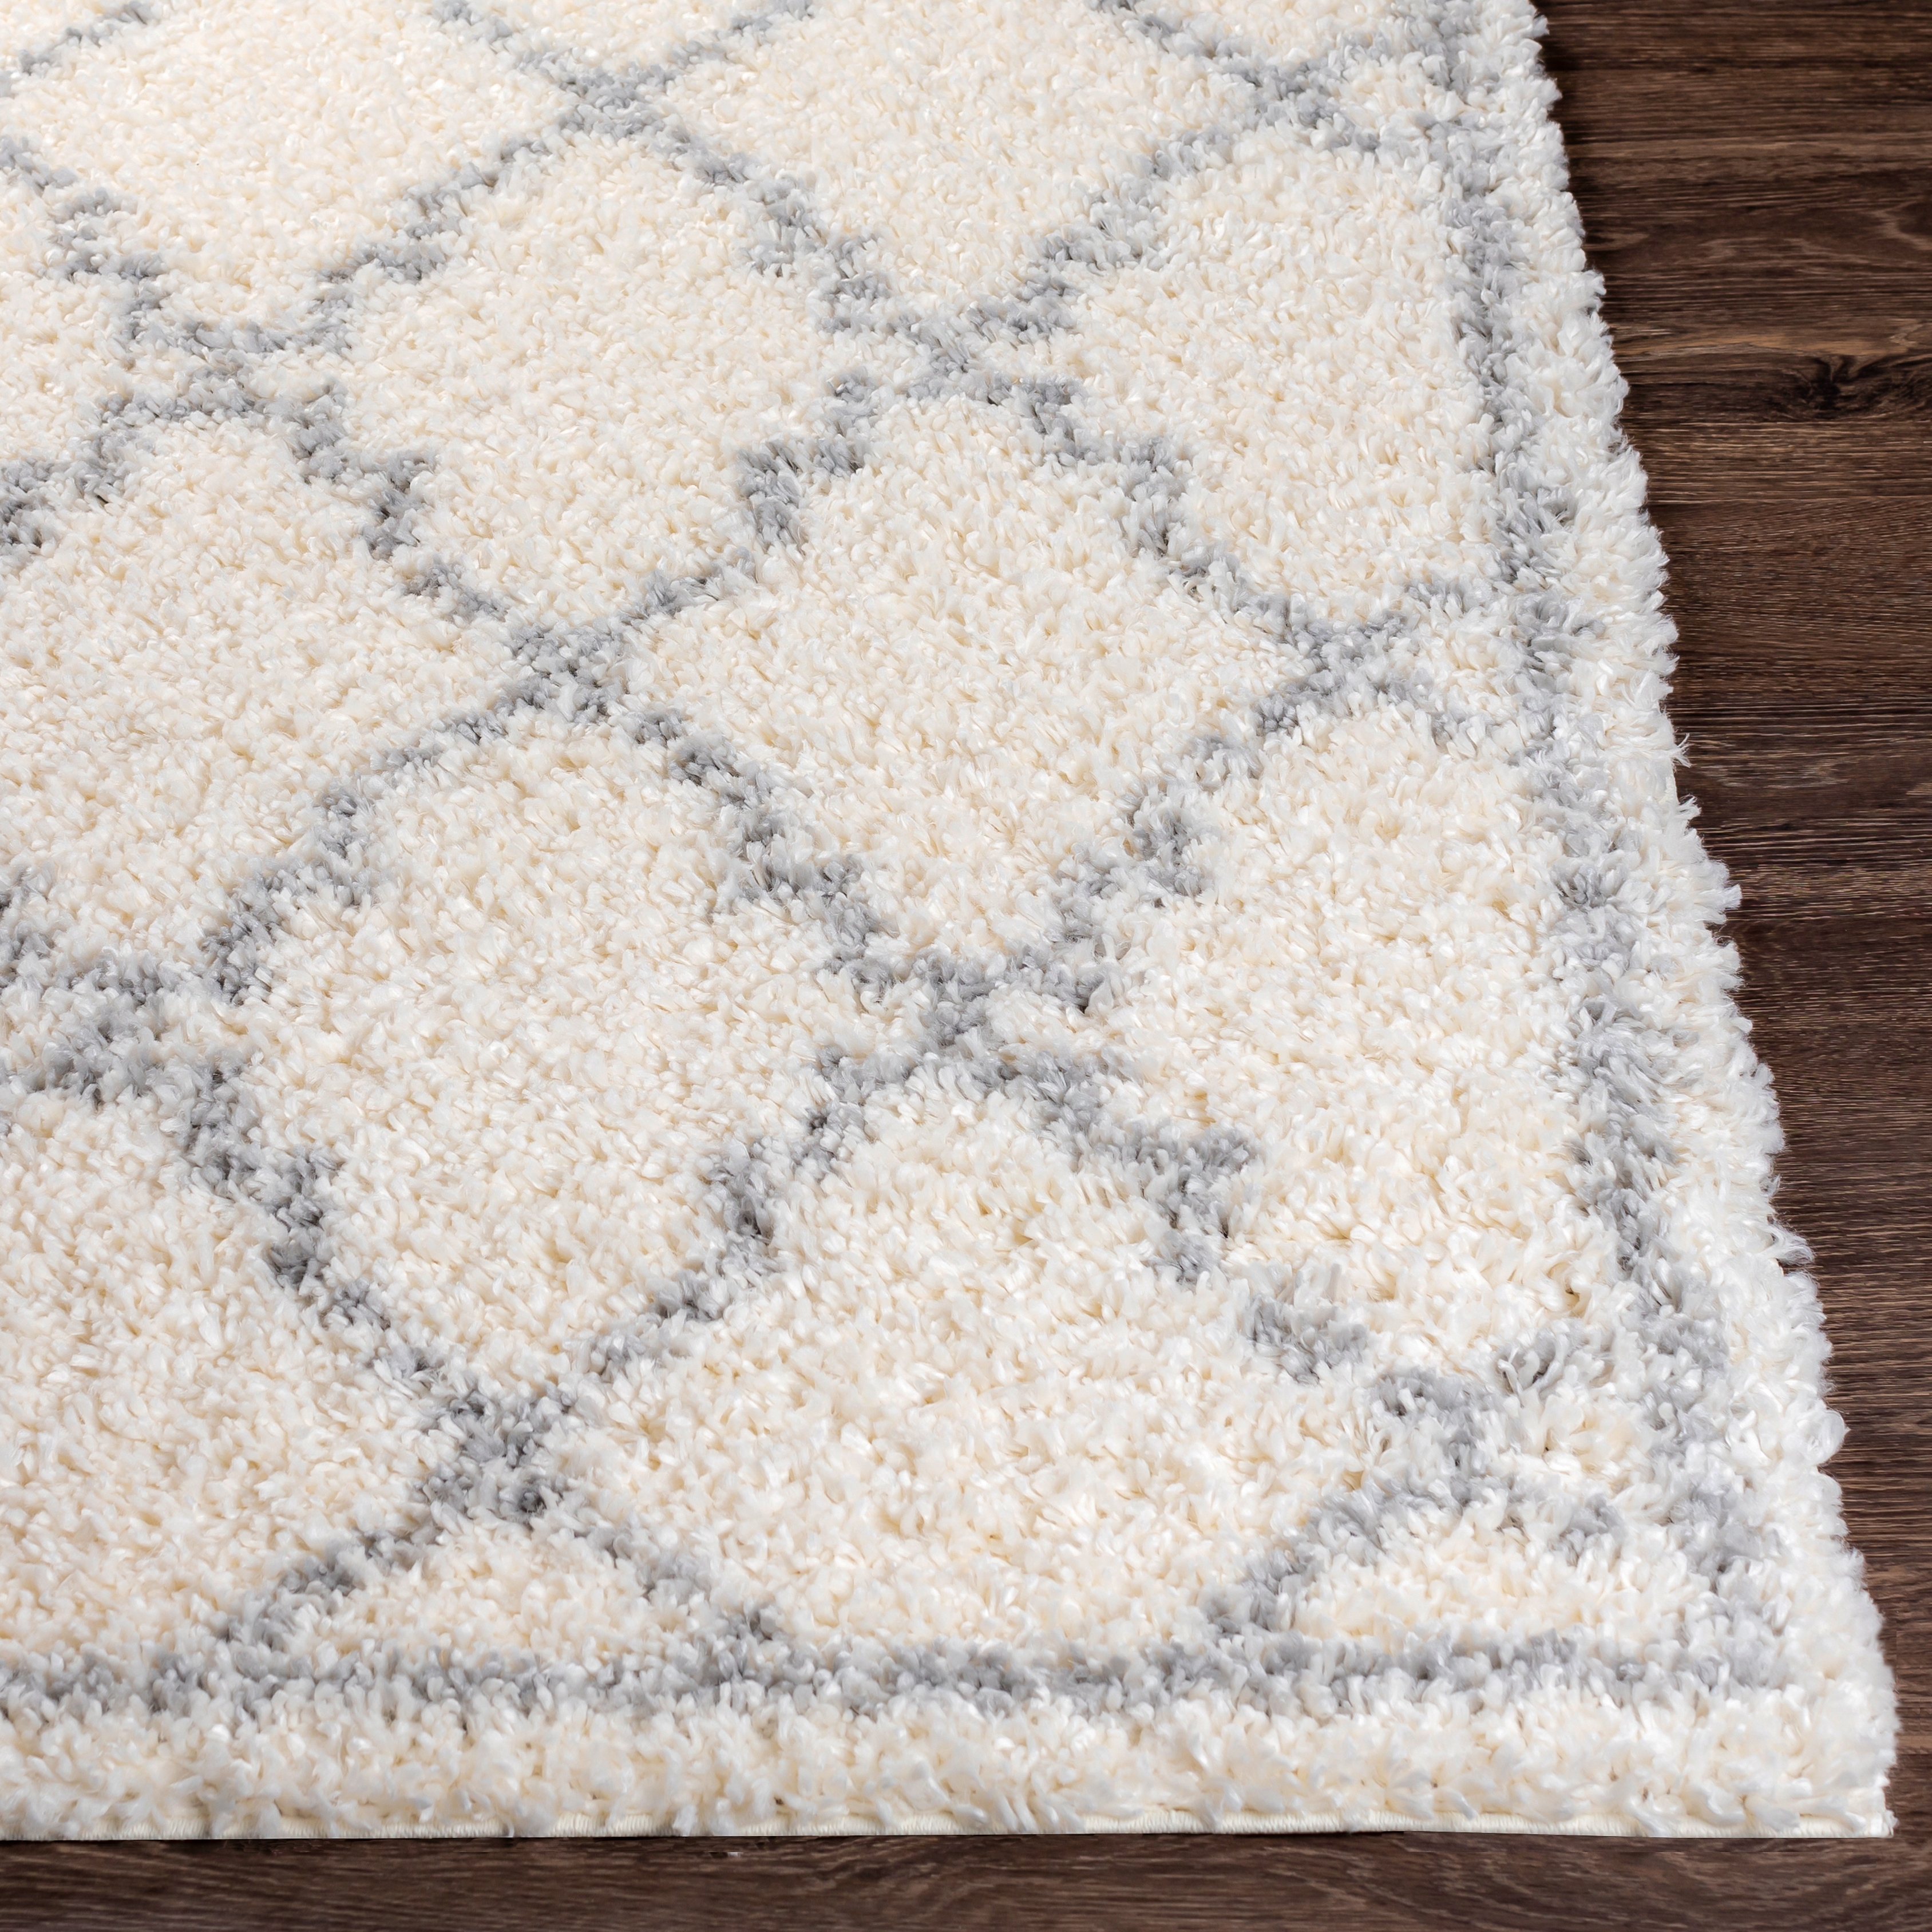 Deluxe Shag Rug, 7'10" x 10'3" - Image 2